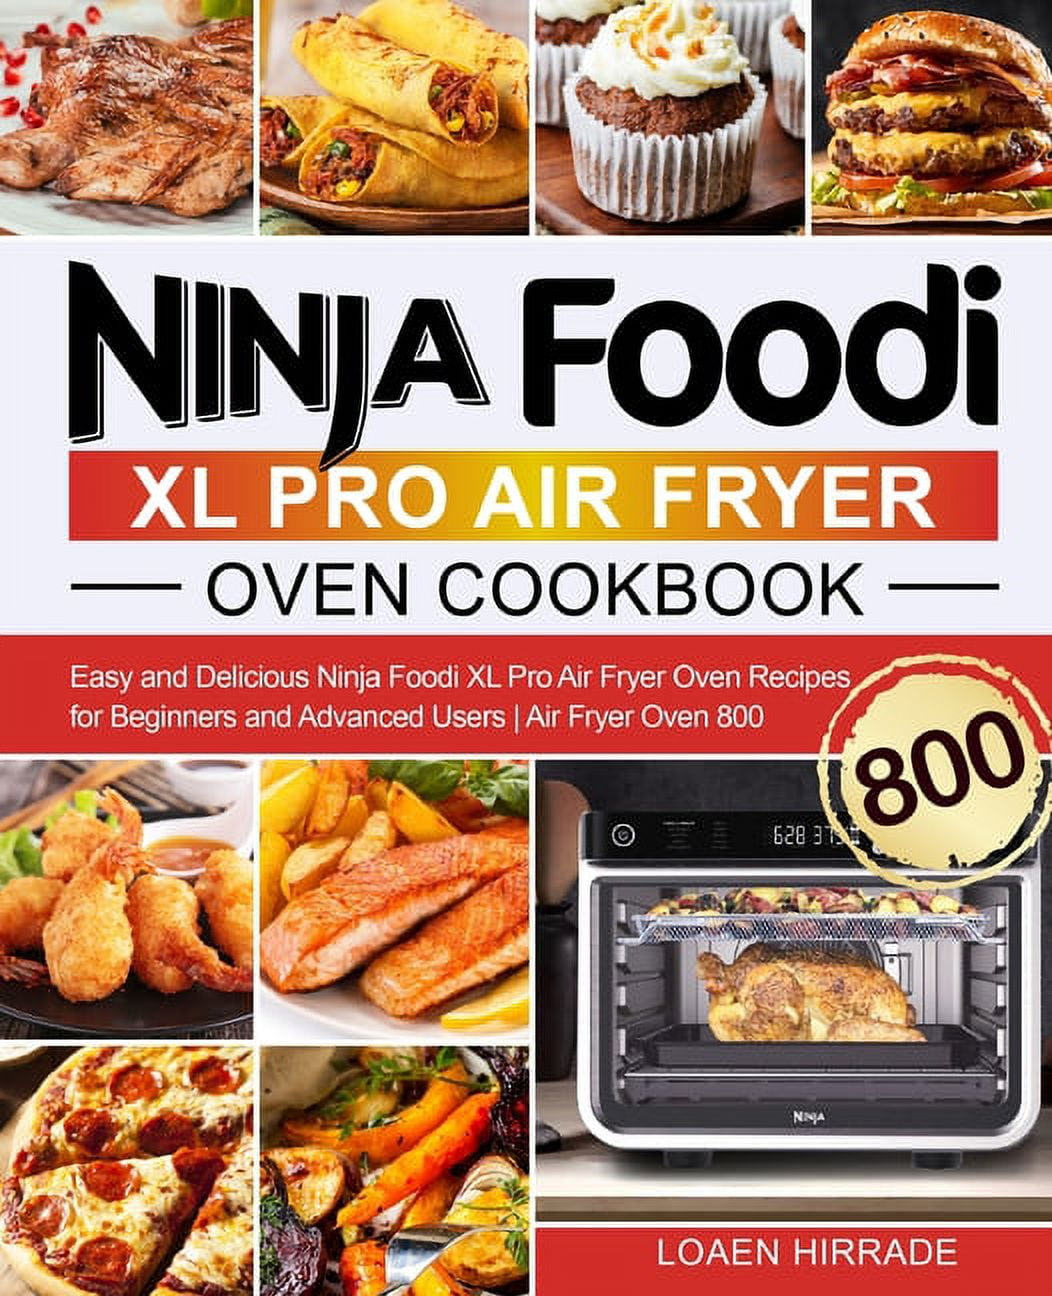 Ninja Air Fryer Max XL Cookbook 1000: Complete Guide of Ninja Air Fryer Cook Book for Beginners and Pros| Used to Fry, Roast, Broil, Bake, Reheat and Dehydrate| A 3-Week Meal Plan with 120 Recipes [Book]